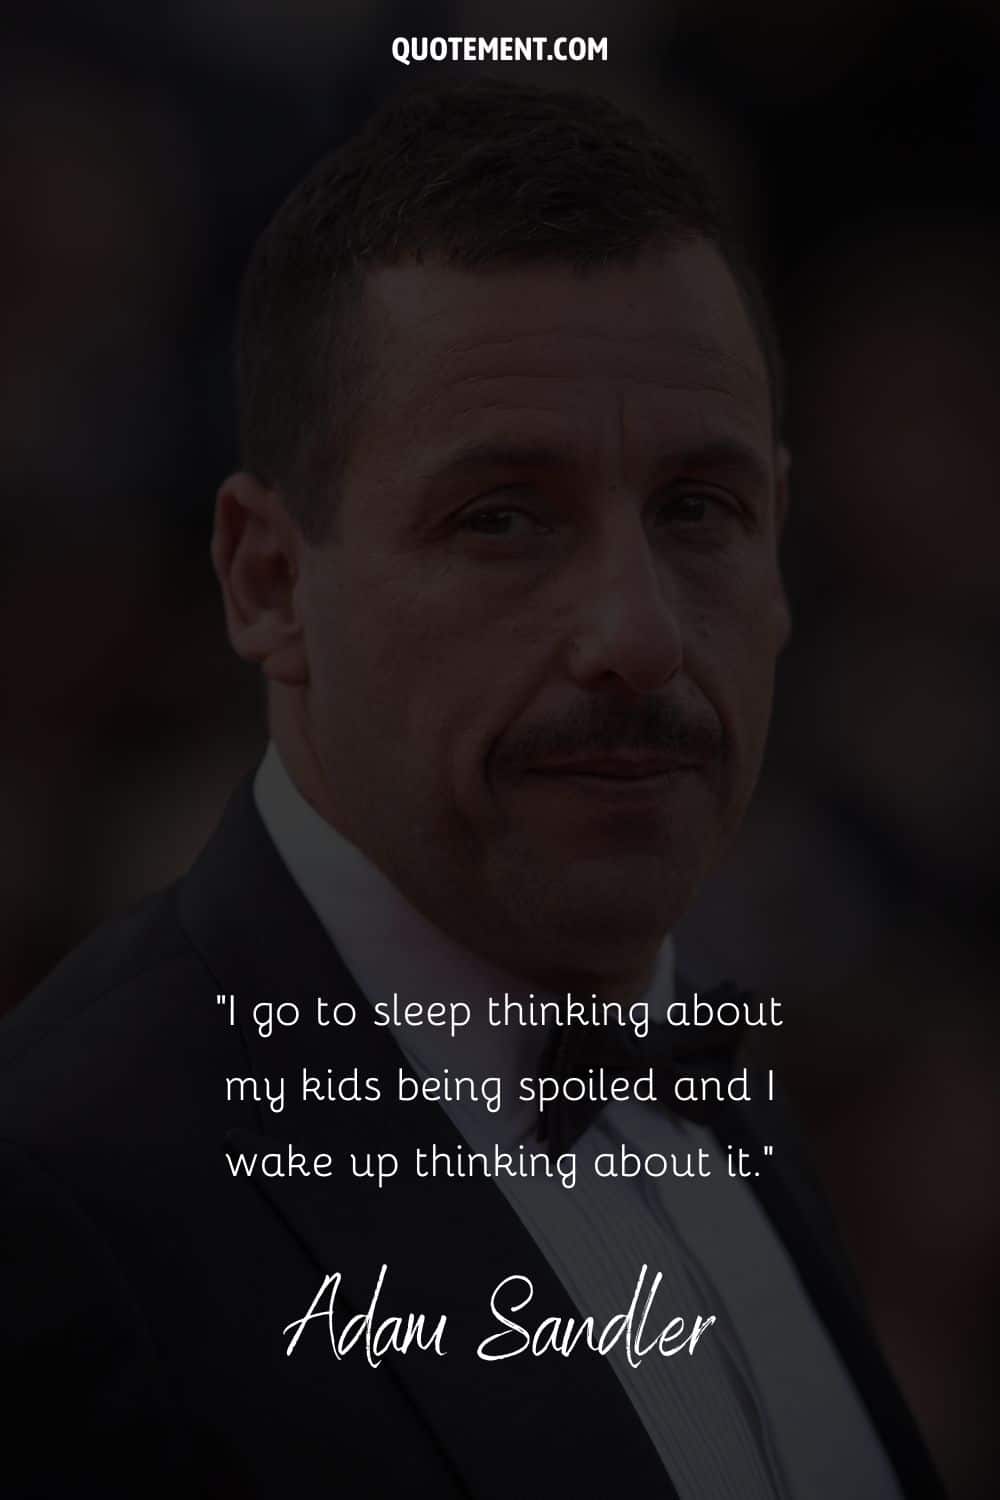 quote on going through life by Adam Sandler